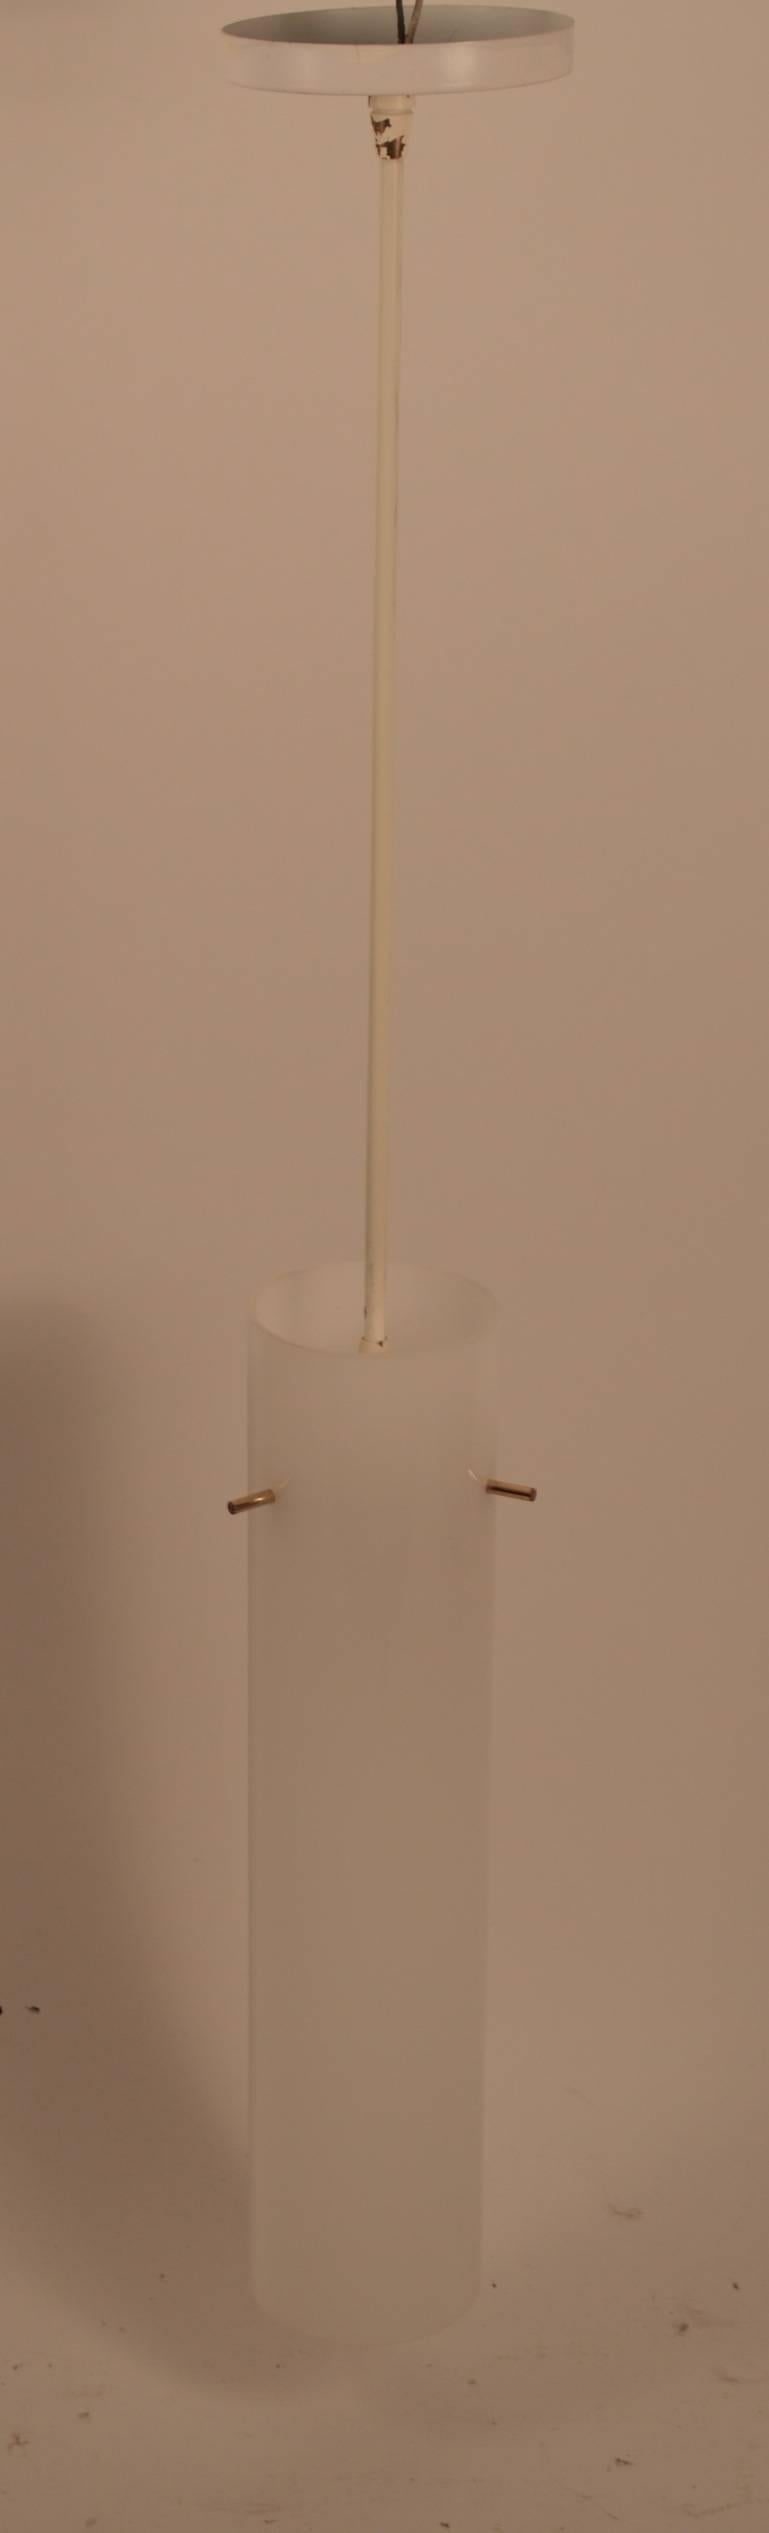 Pair of tubular plastic hanging fixtures. Each fixture has  three brass elements  which support the white shade, which hangs from a vertical  painted white ( original paint  finish ) brass tube, original canopies included.  Modernist  Minimalist 